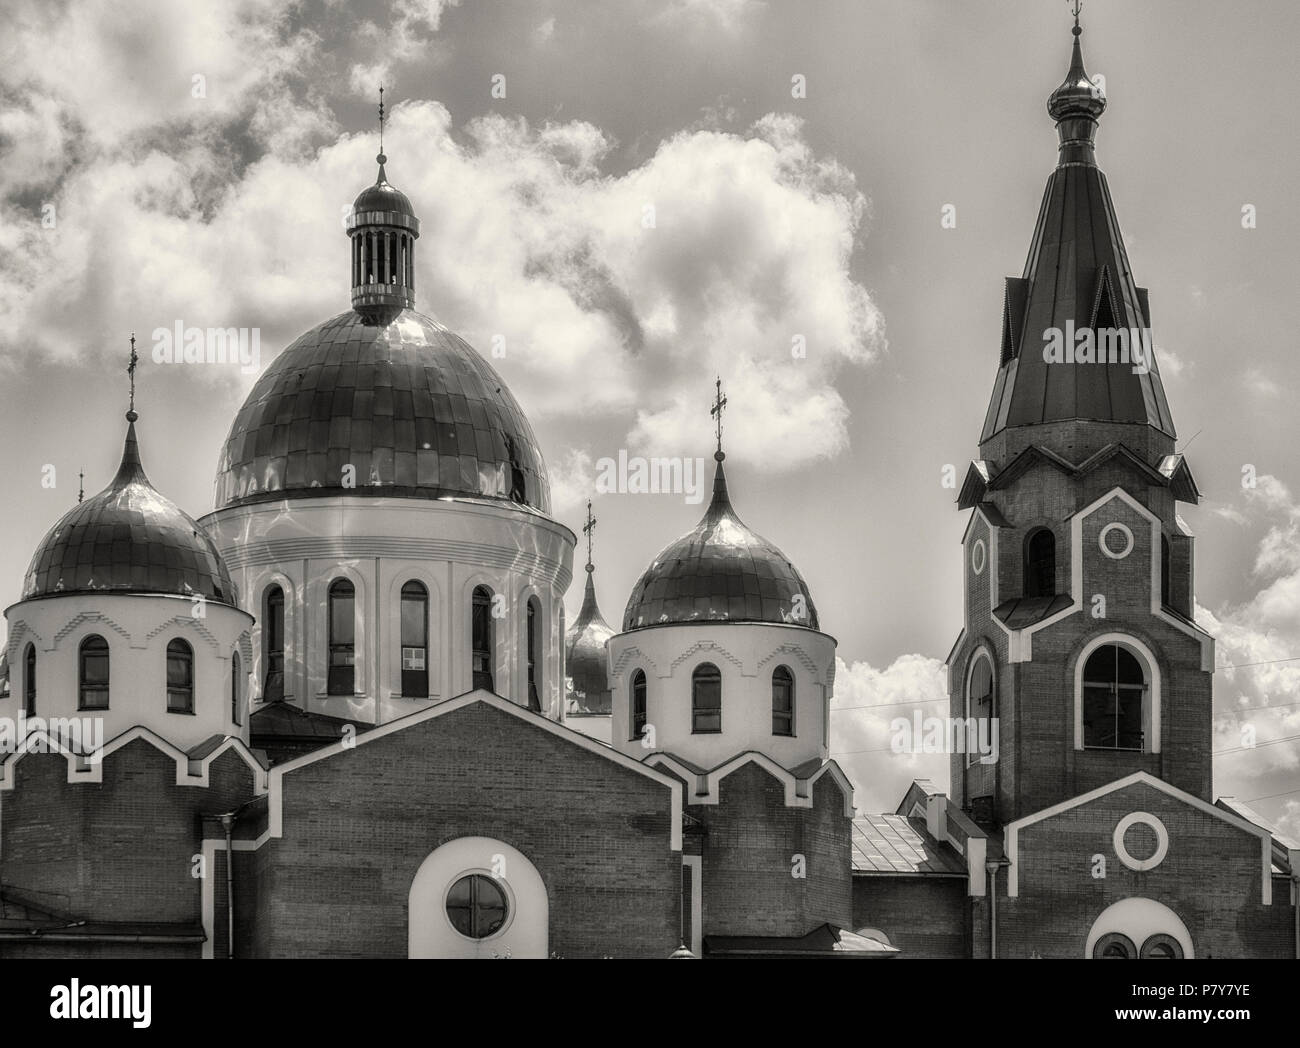 St. Andrew's Cathedral in Ust-Kamenogorsk. Religious architecture. Monochrome. Stock Photo